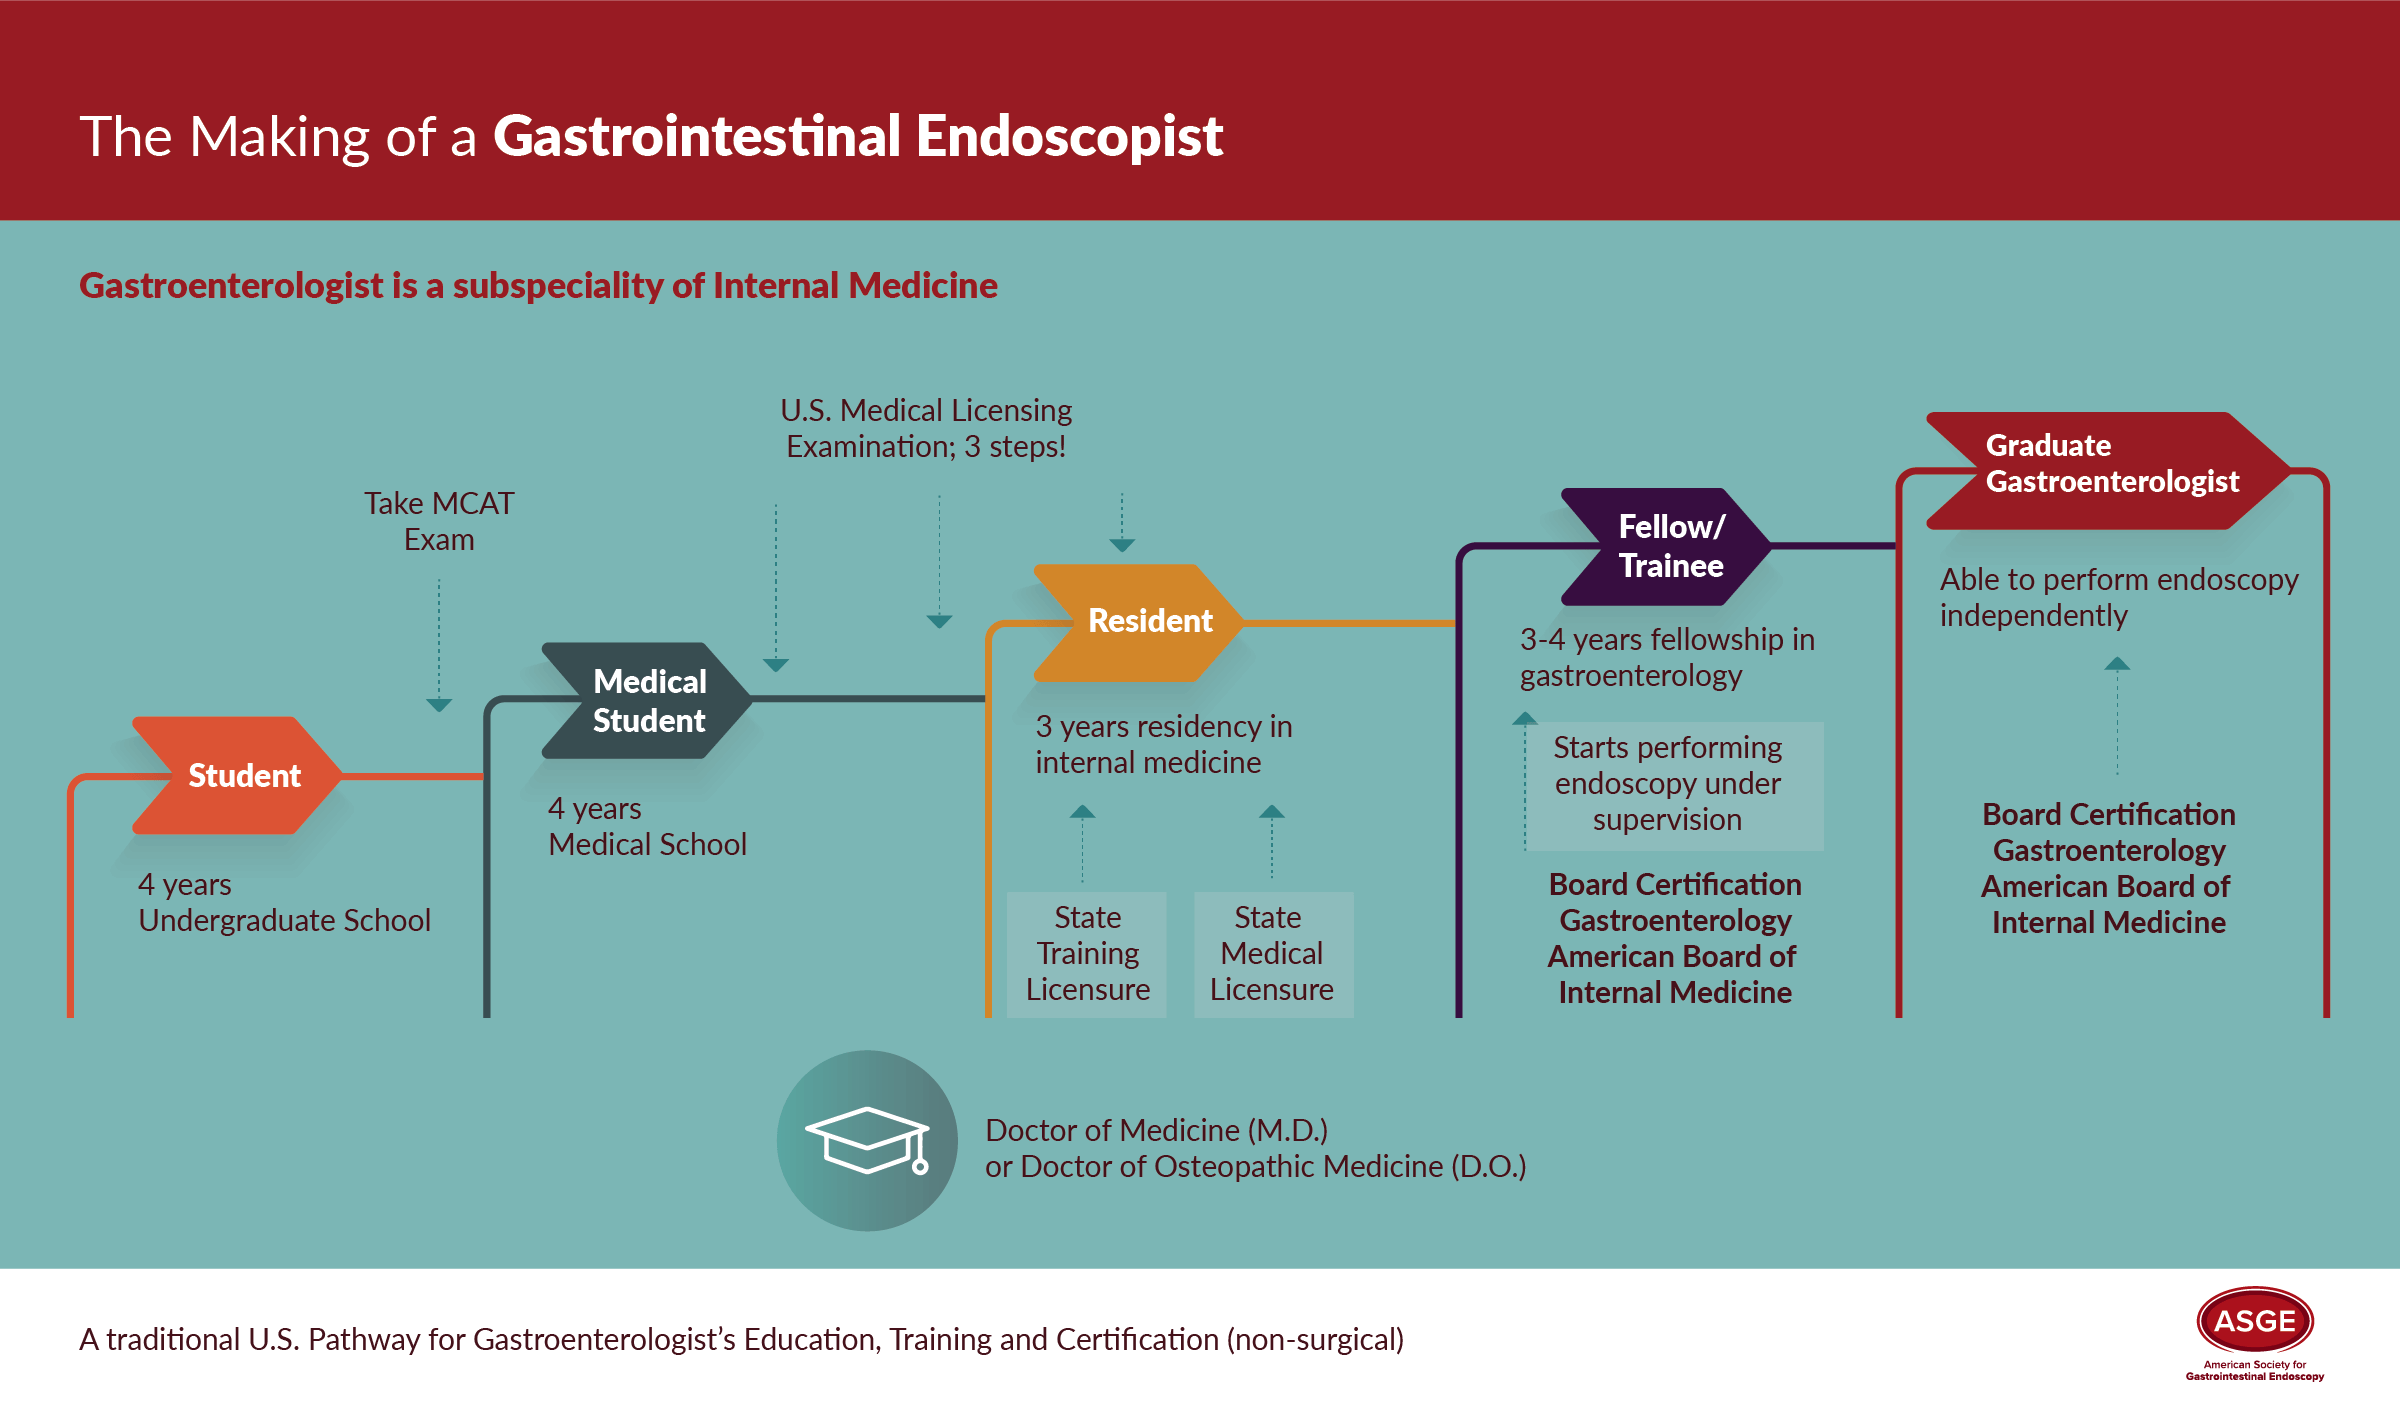 The Making of a Gastrointestinal Endoscopist